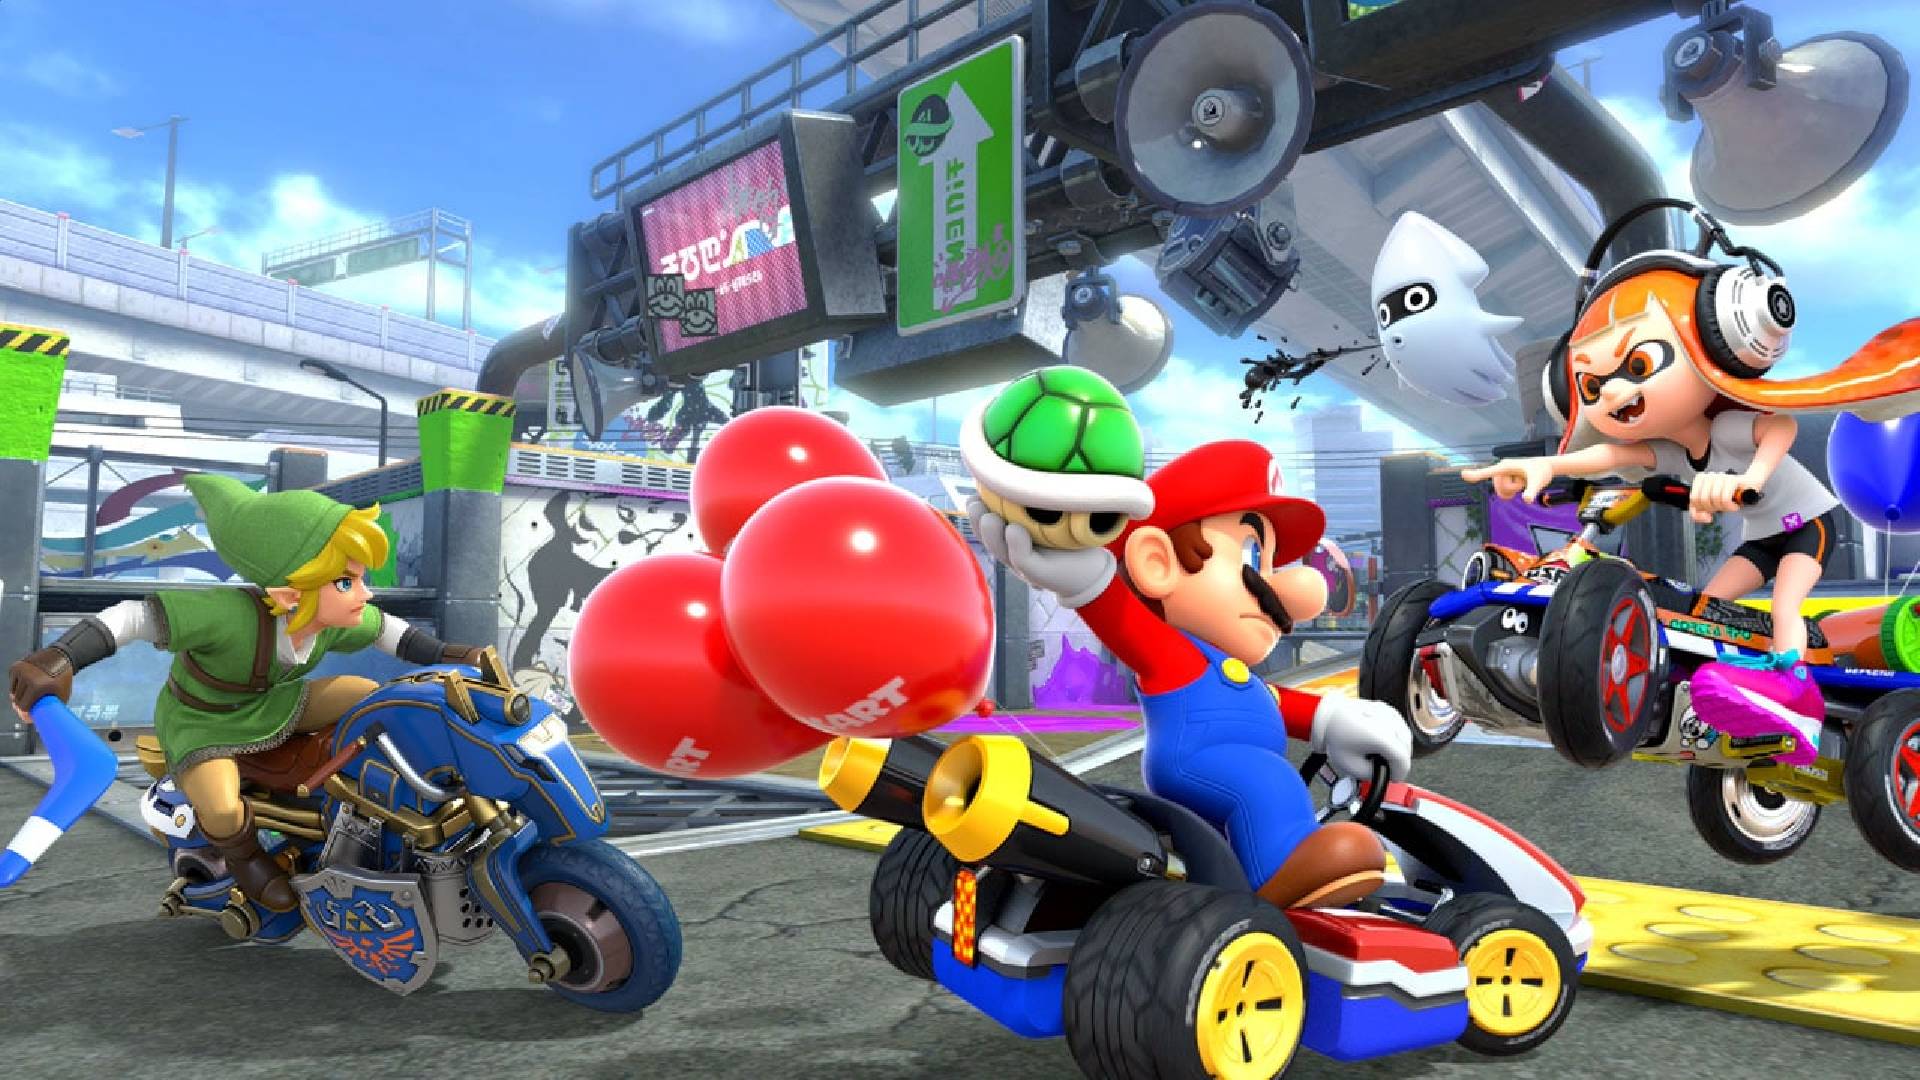 Mario Kart Characters Guide – Find Out All About Your Favourite Mario Kart 8 Deluxe Racers thumbnail